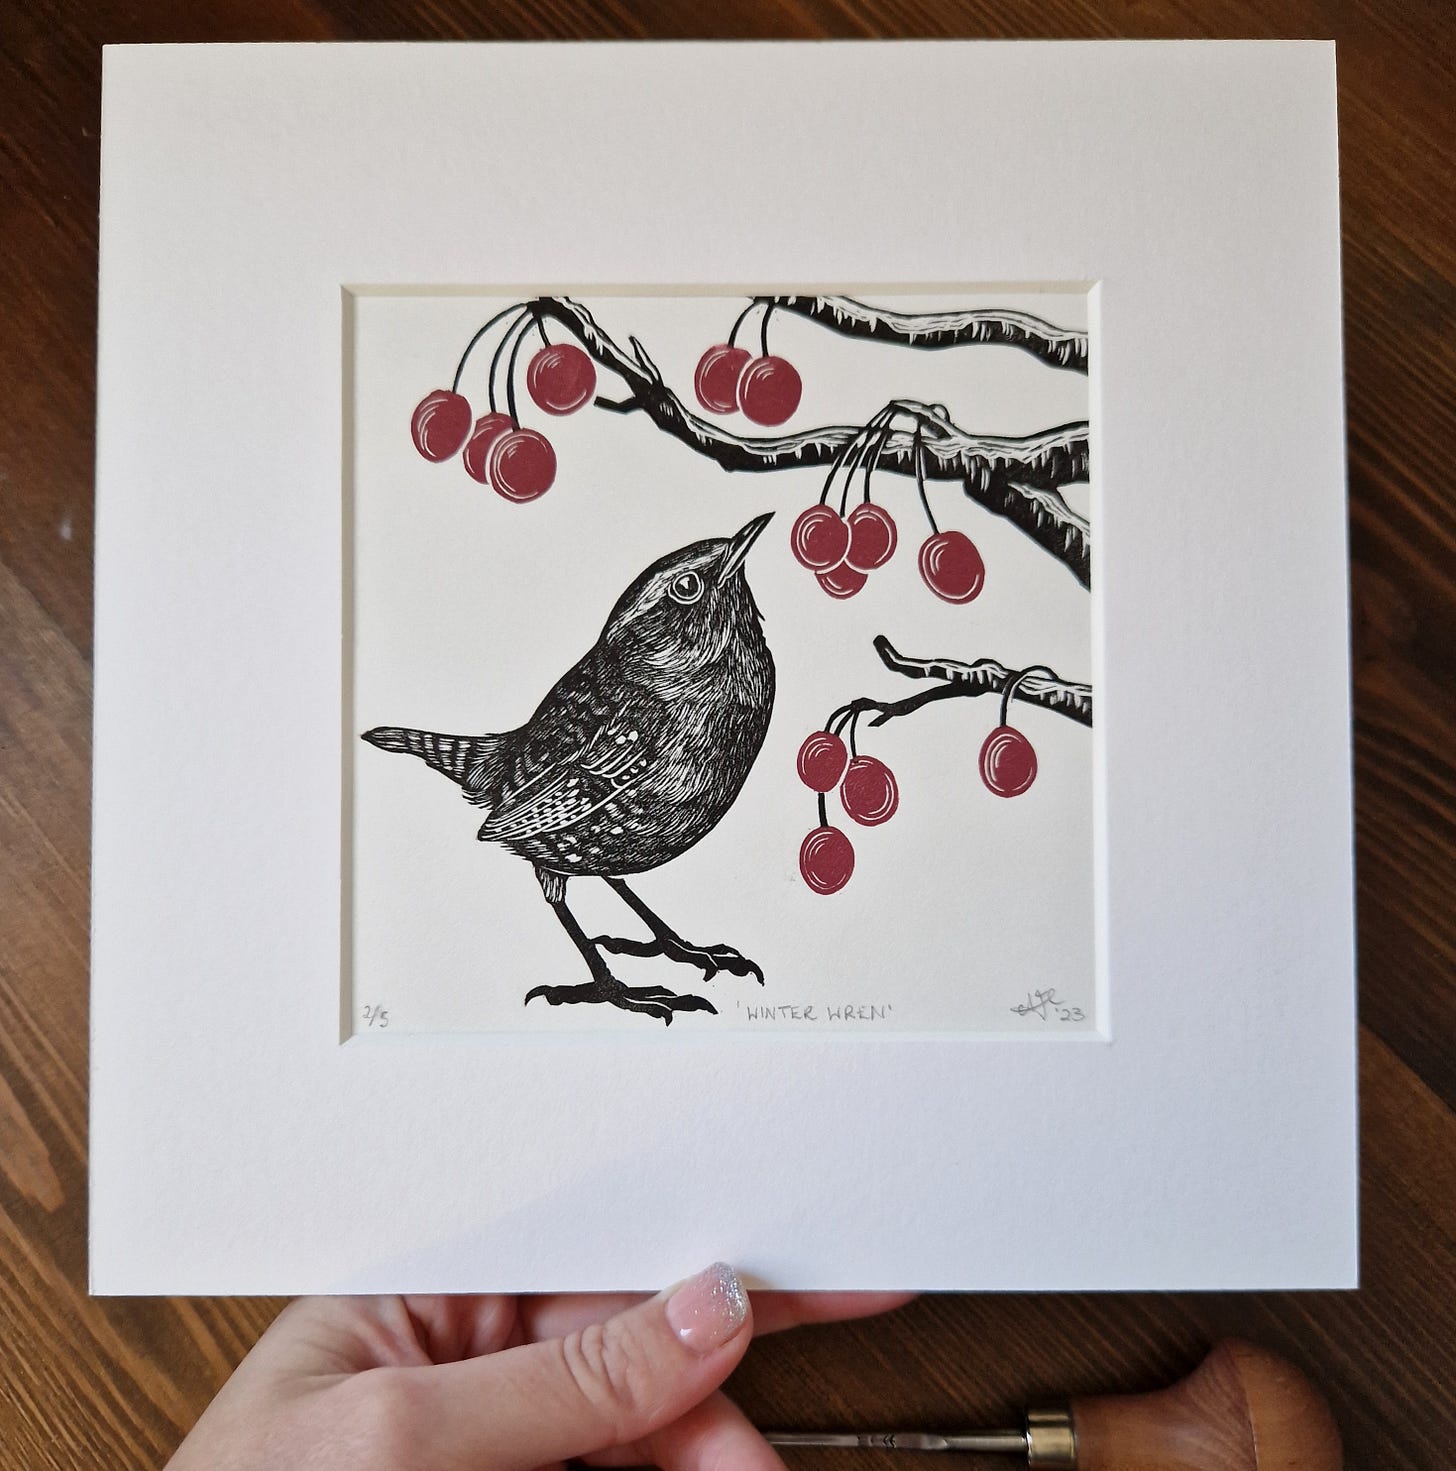 'Winter Wren' - a multi block Lino relief print using black and red inks on warm white handmade Japanese Bamboo paper, set in a 8 inch mount  'Winter Wren' is a beautiful serene image of a highly detailed Wren amongst bright red berries and branches.